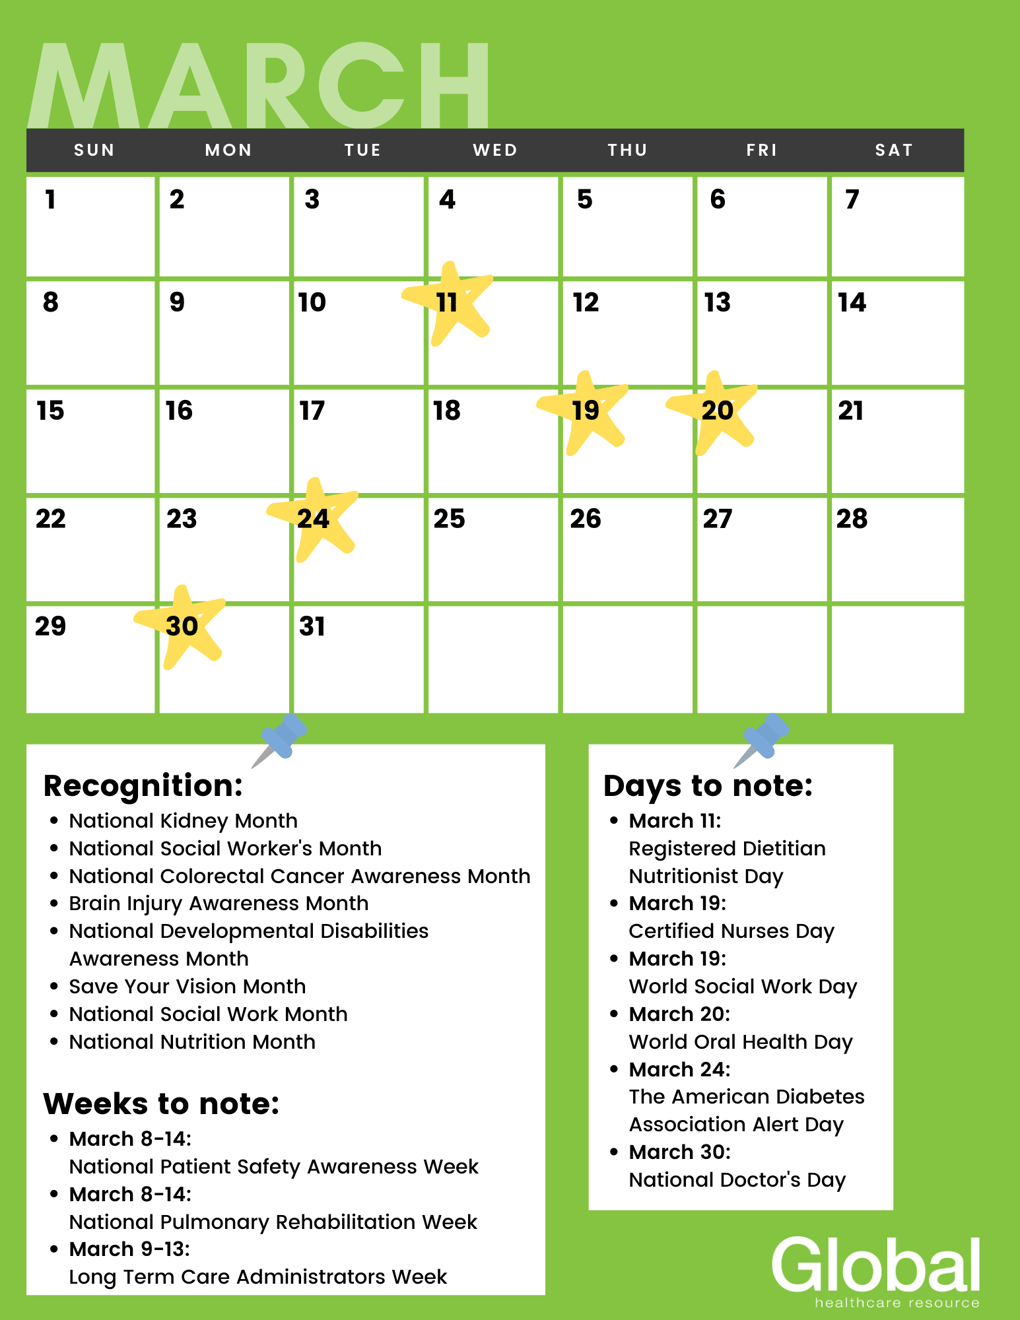 March Health Awareness Calendar Month, Weeks, and Days